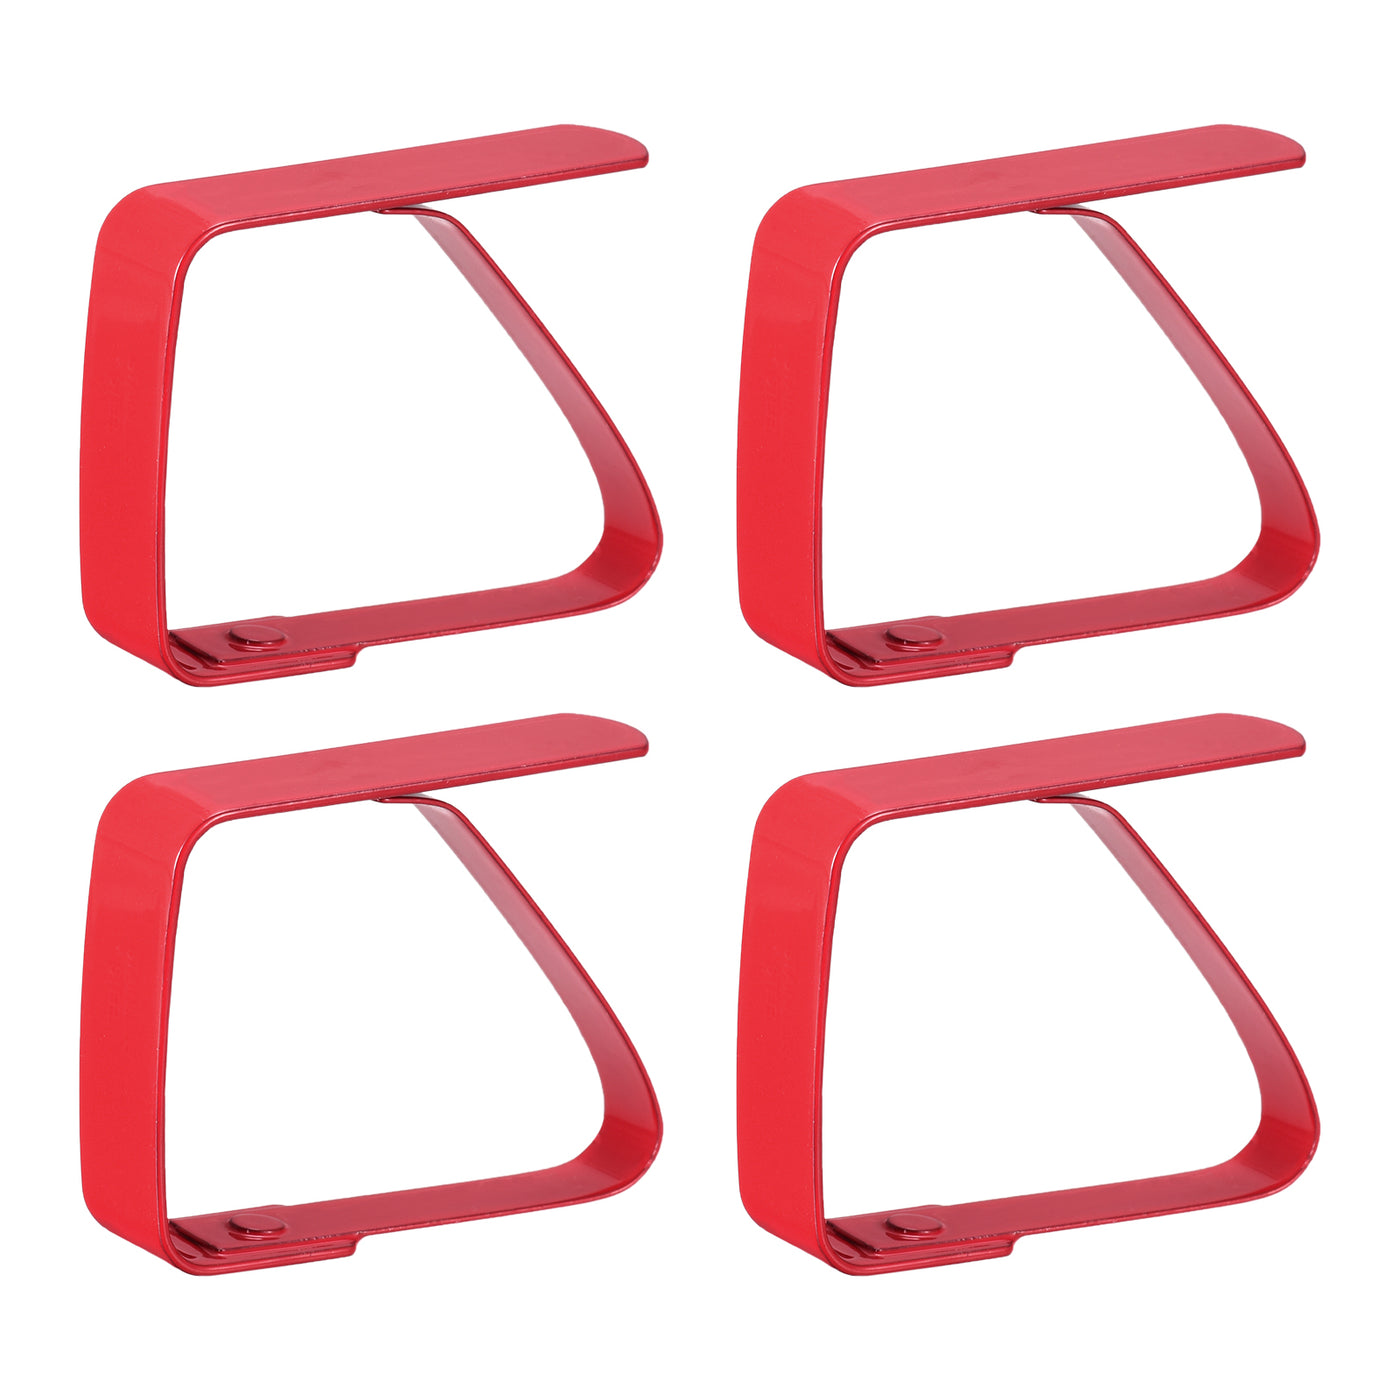 uxcell Uxcell Tablecloth Clips 50mm x 40mm 420 Stainless Steel Table Cloth Holder Red 4 Pcs